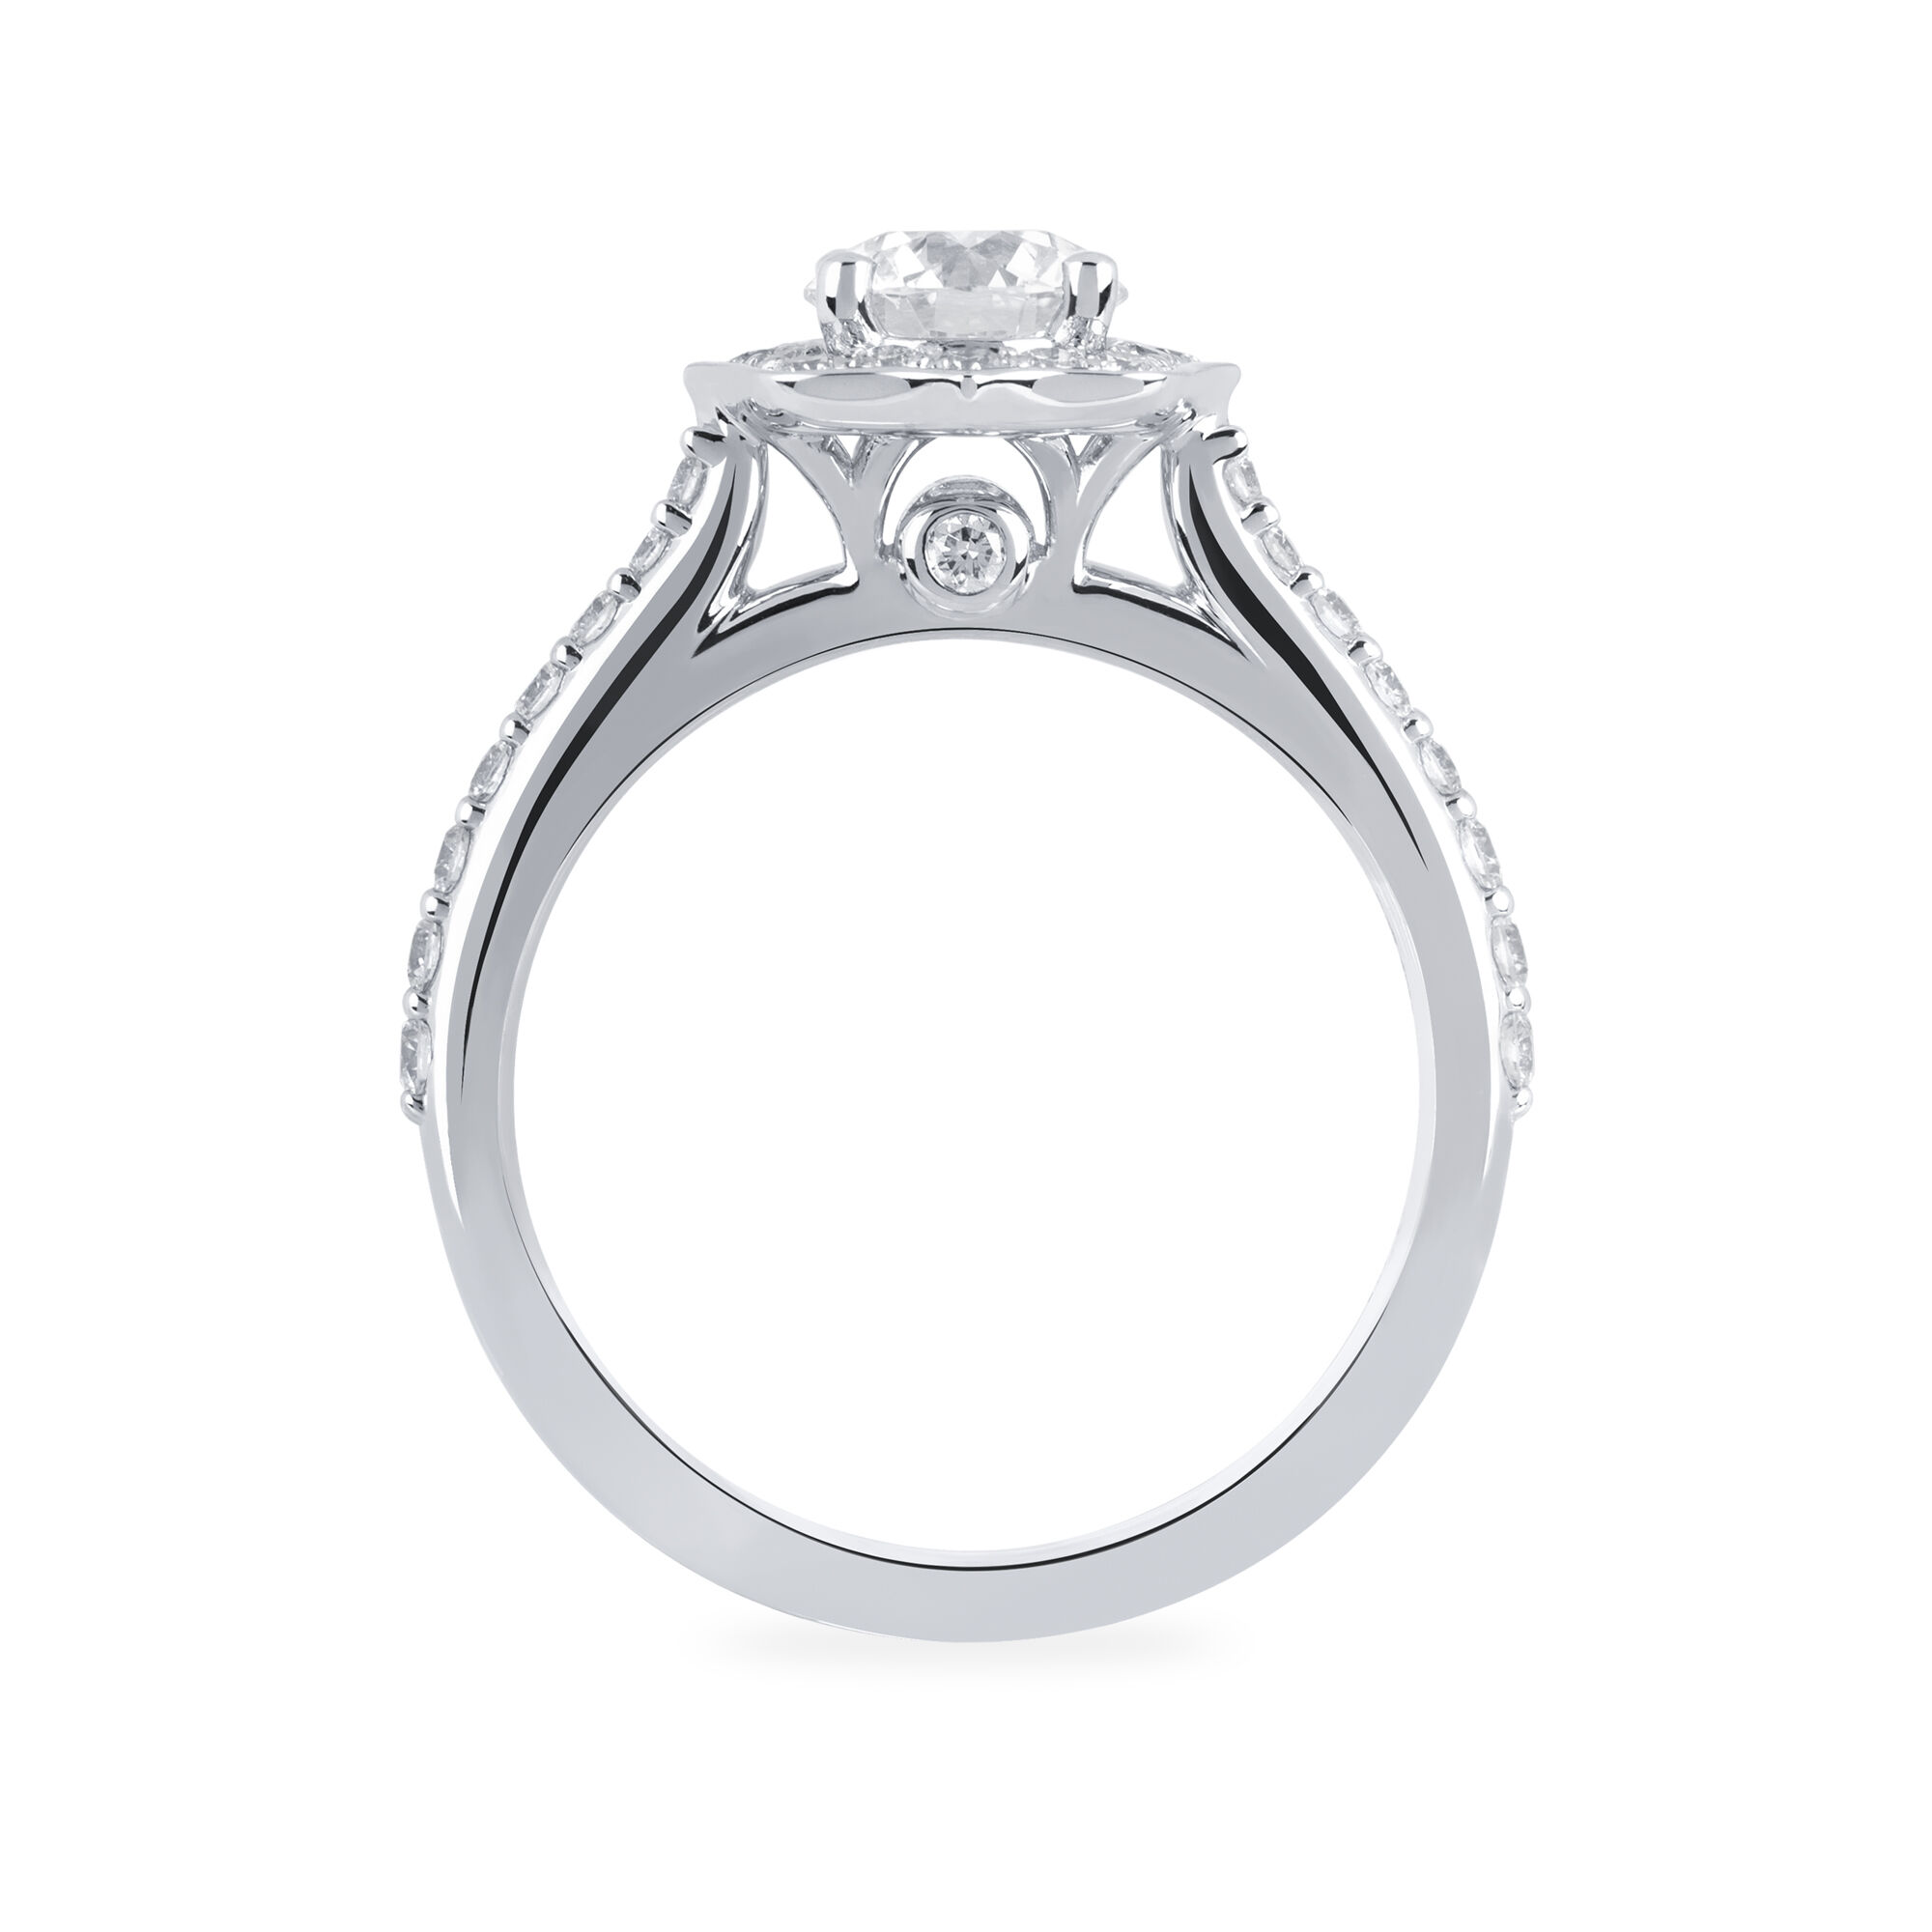 Heirloom Round Solitaire Diamond Engagement Ring with Halo and 